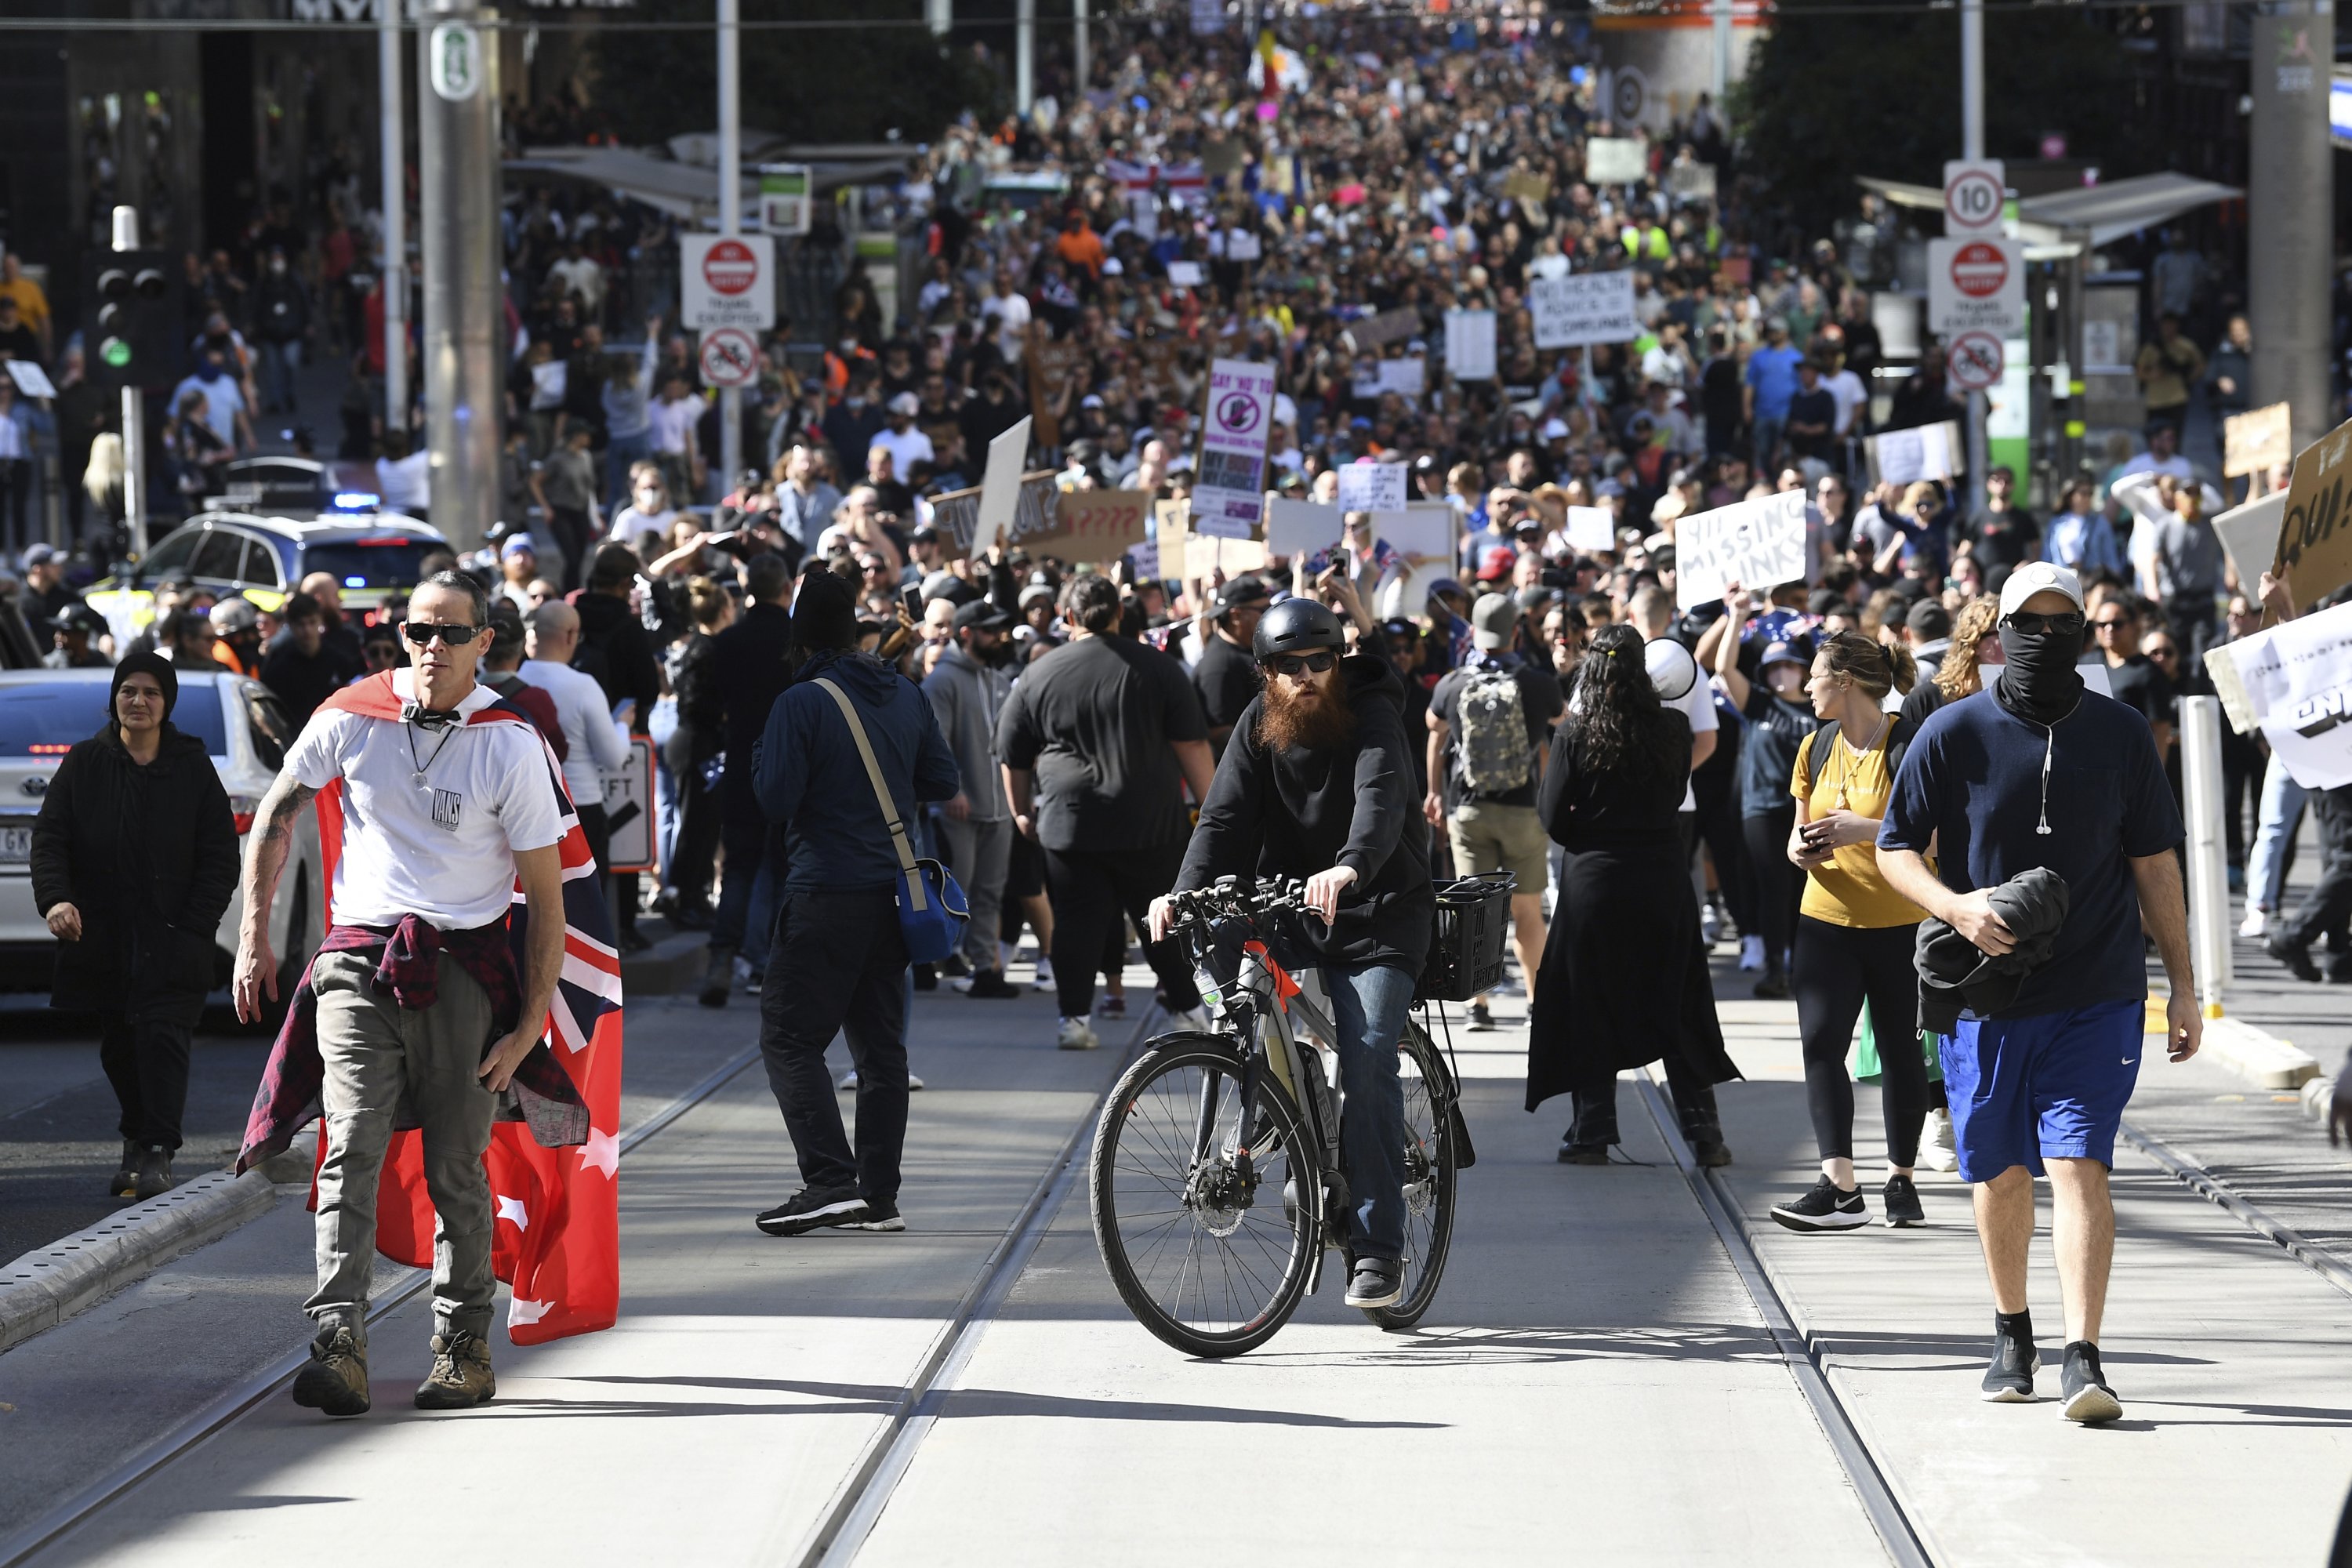 Hundreds of protesters march on a street during an anti-lockdown protest in Melbourne, Australia, Saturday, Aug. 21, 2021. (James Ross/AAP Image via AP)